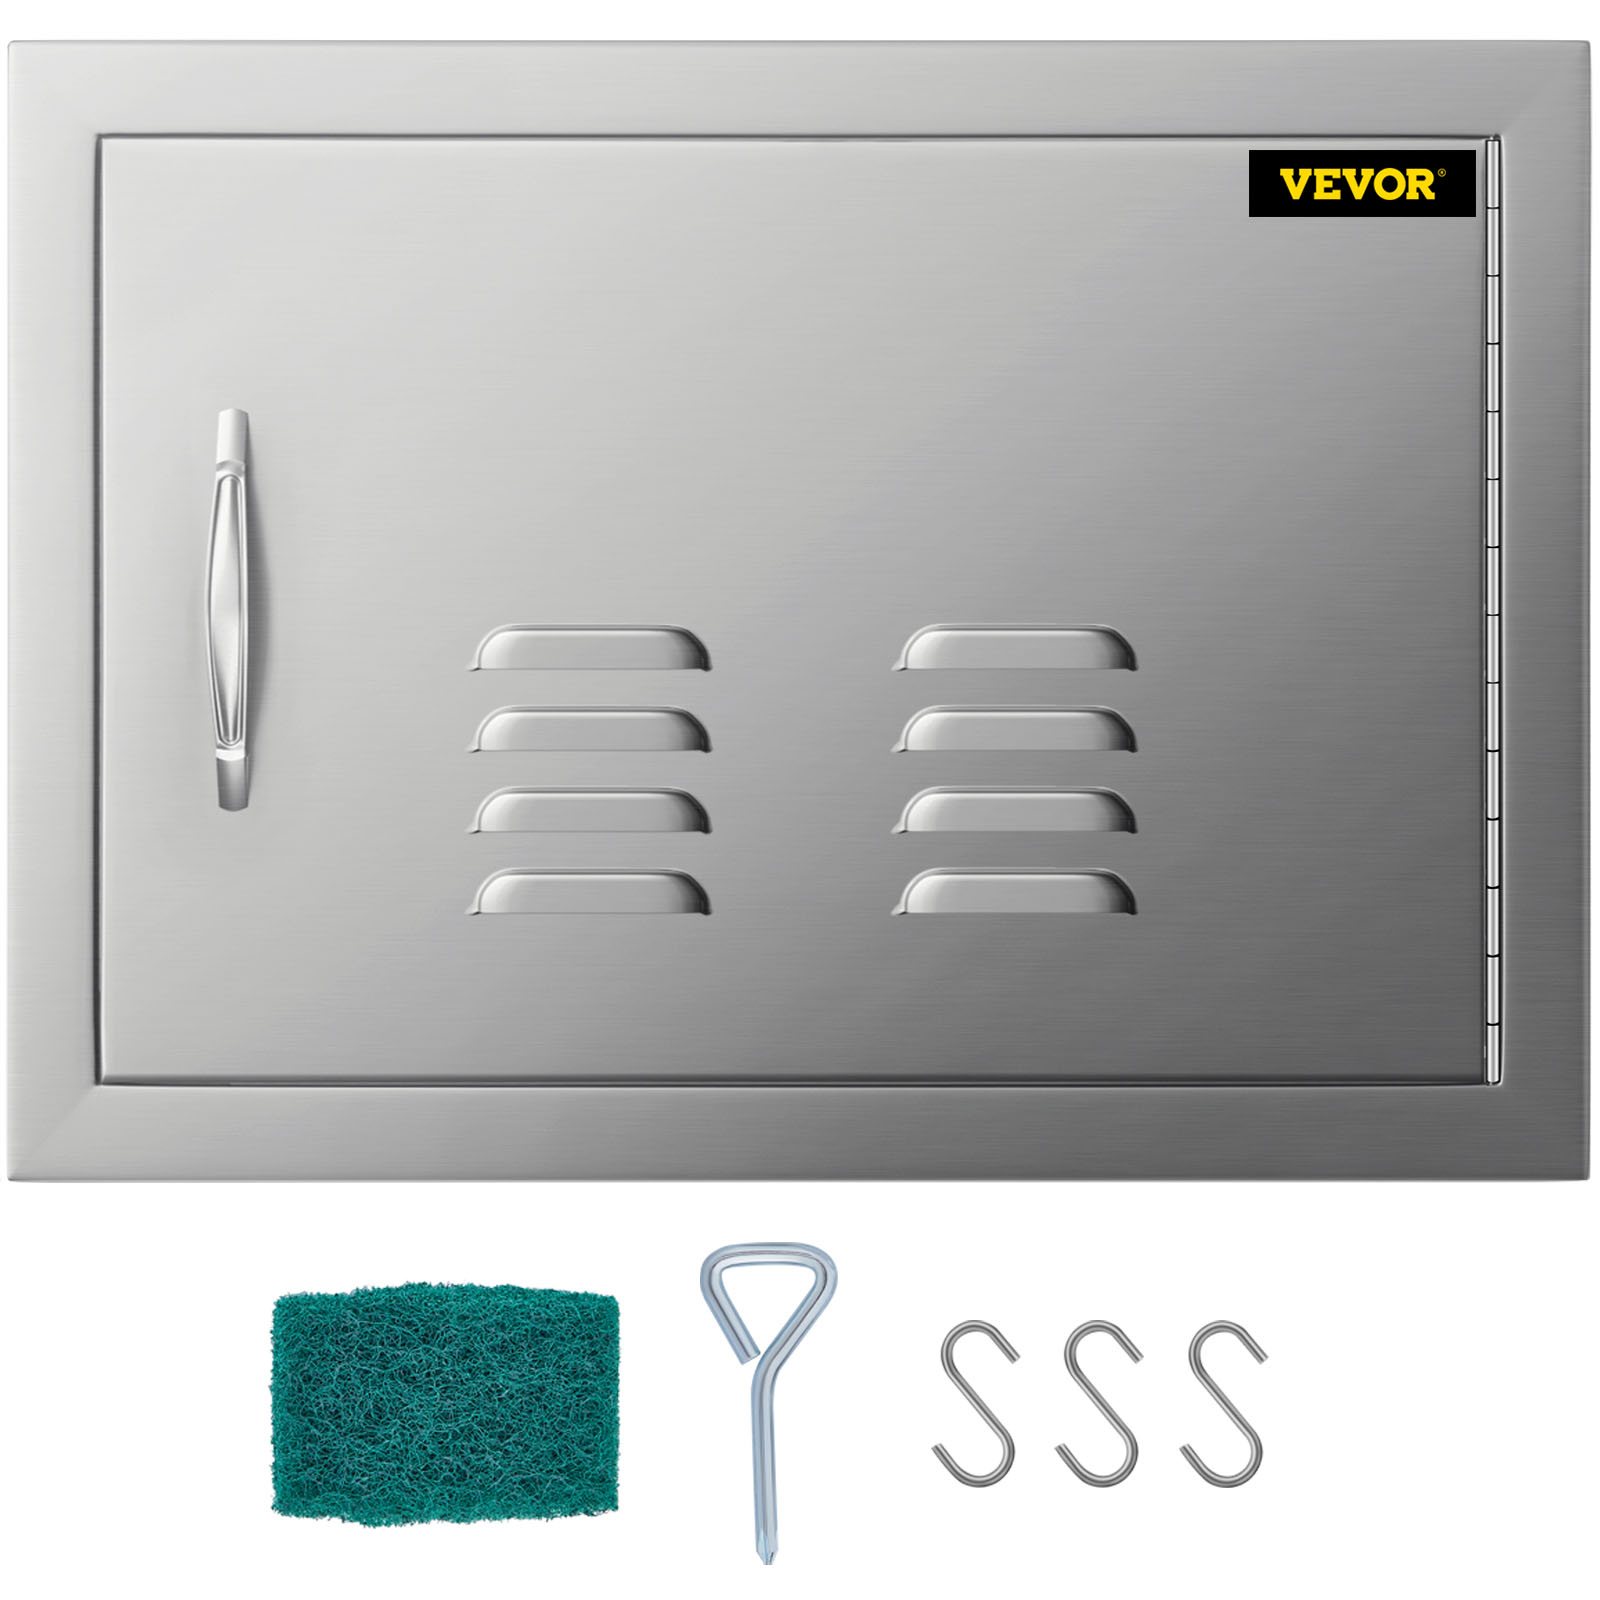 VEVOR  BBQ Access  Door with Vents 14W x 20H inch Wall Construction Stainless Steel Flush Mount for BBQ Island, 14inch x 20inch, Single BBQ Island Door Metals Horizontal Single Access Door - image 1 of 10